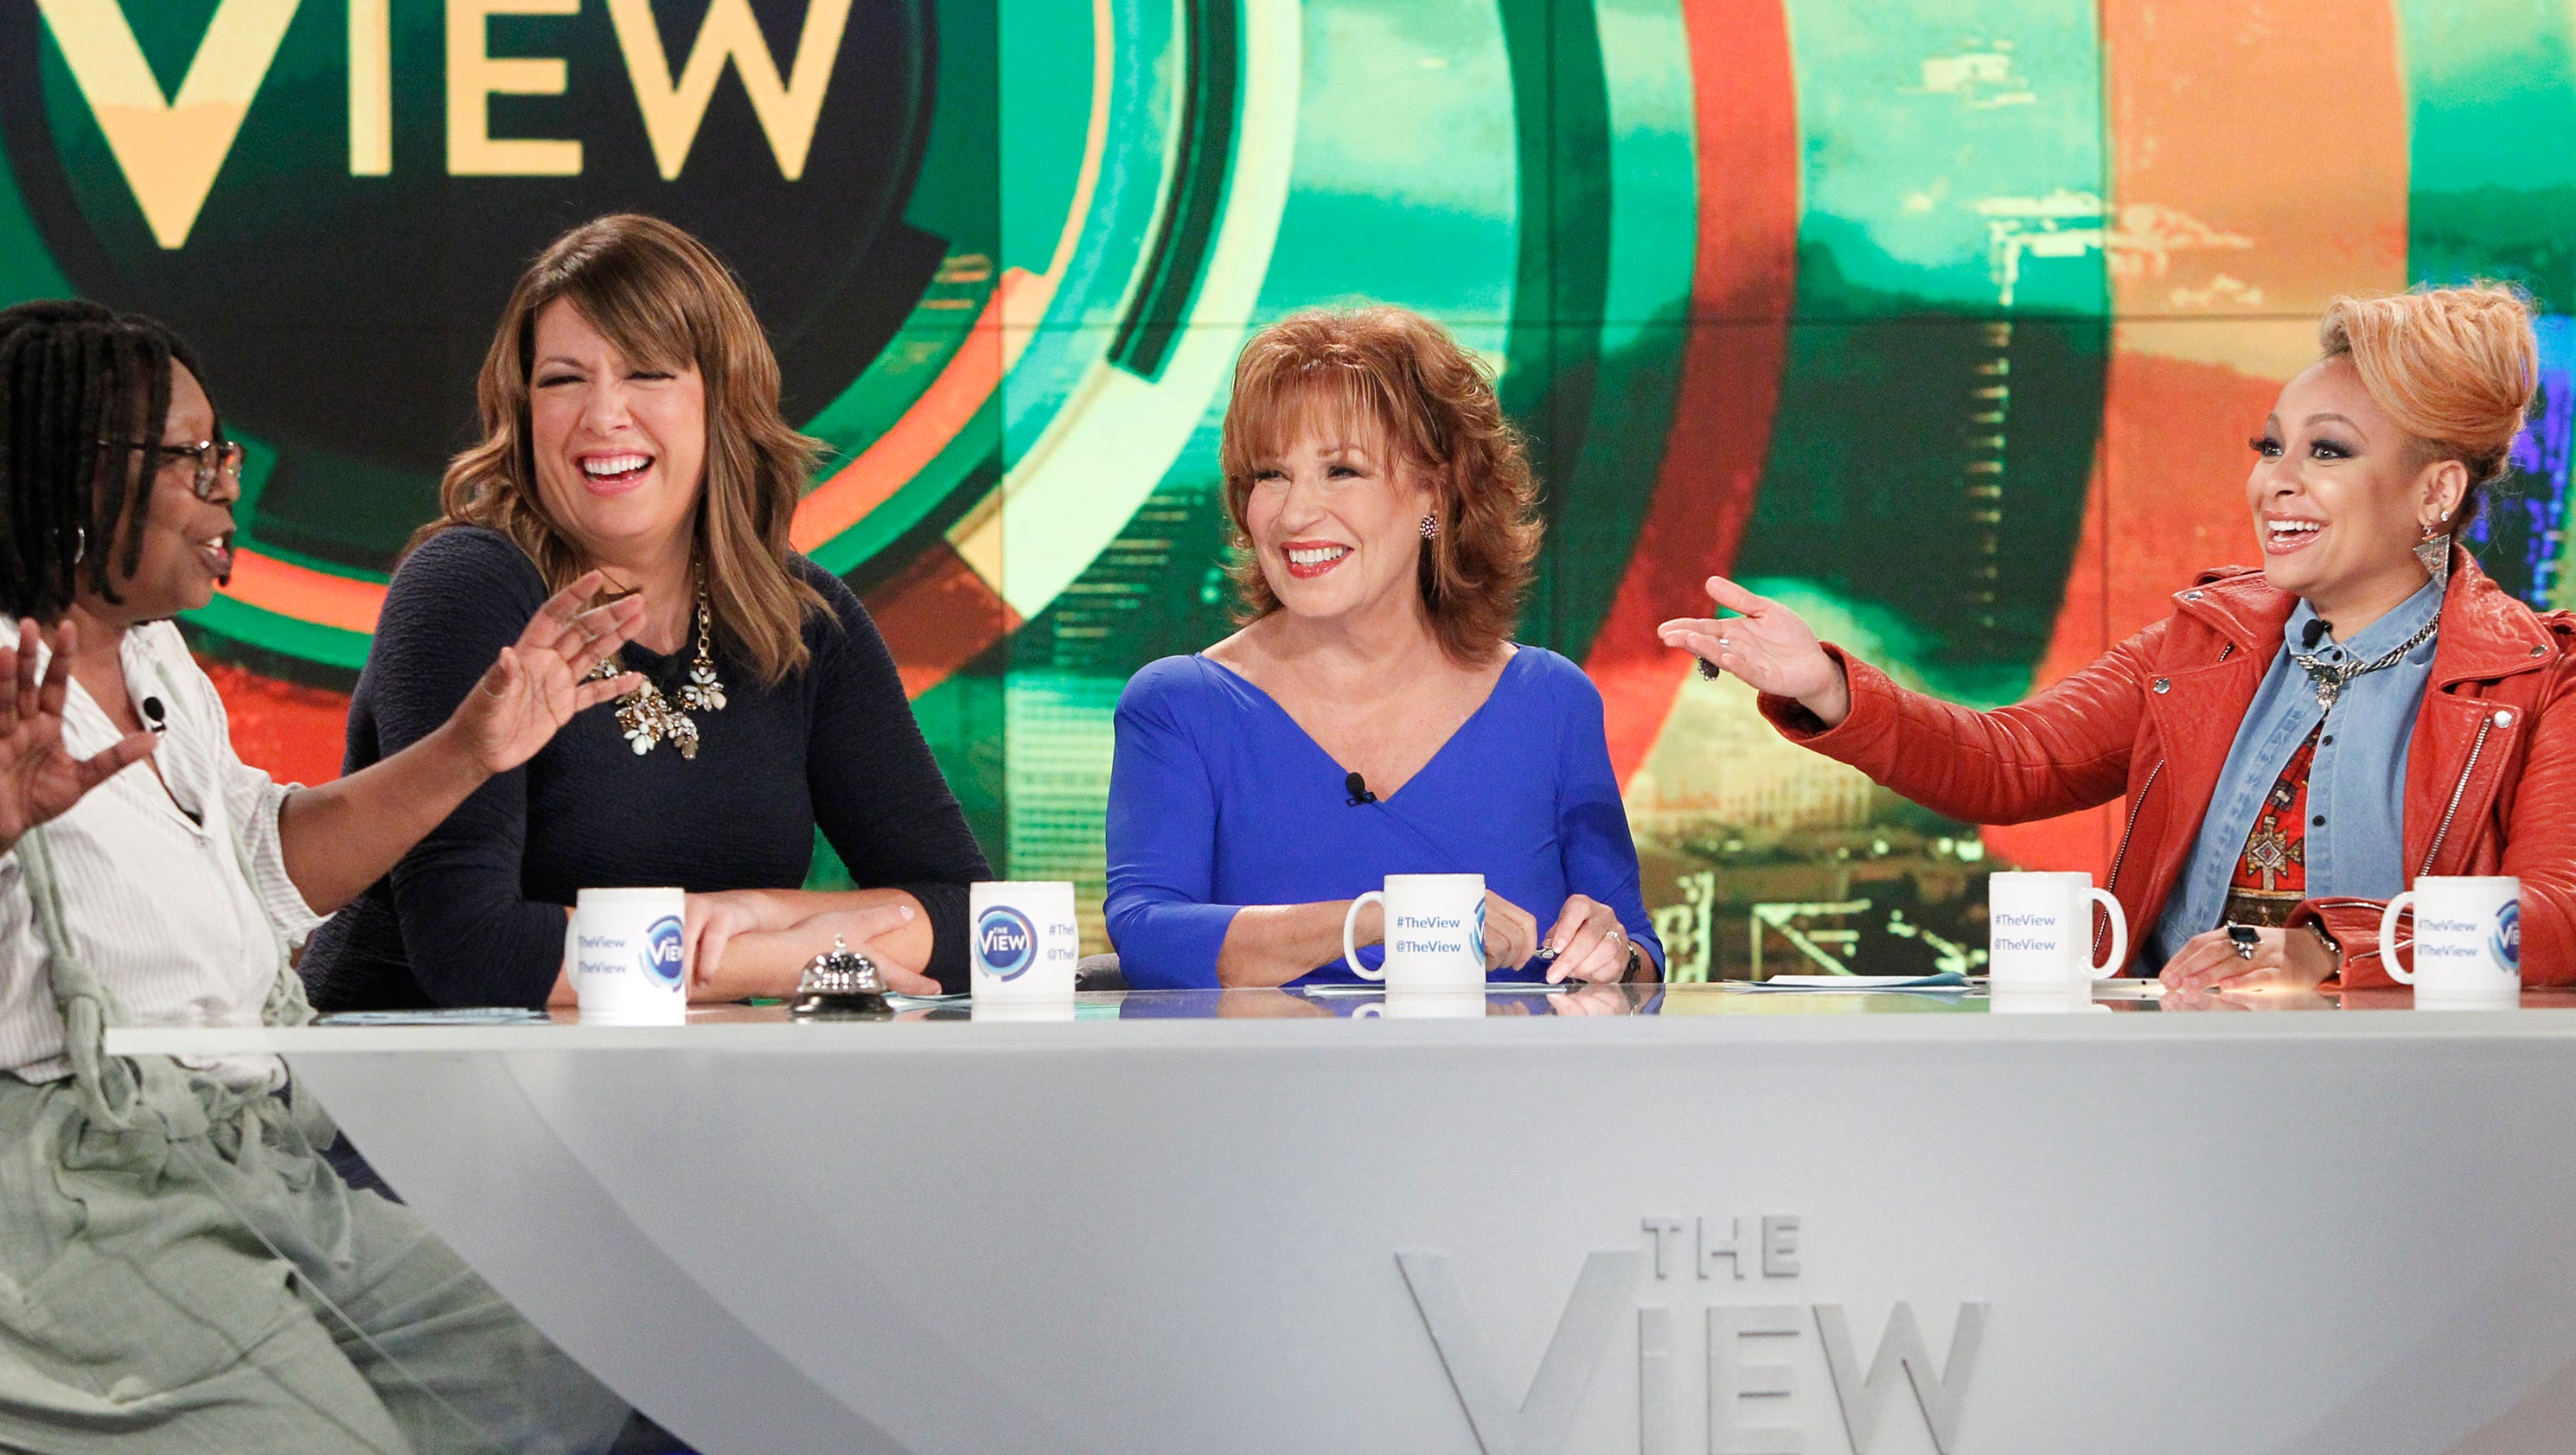 Advertisers pull ads from 'The View' following nurse comments